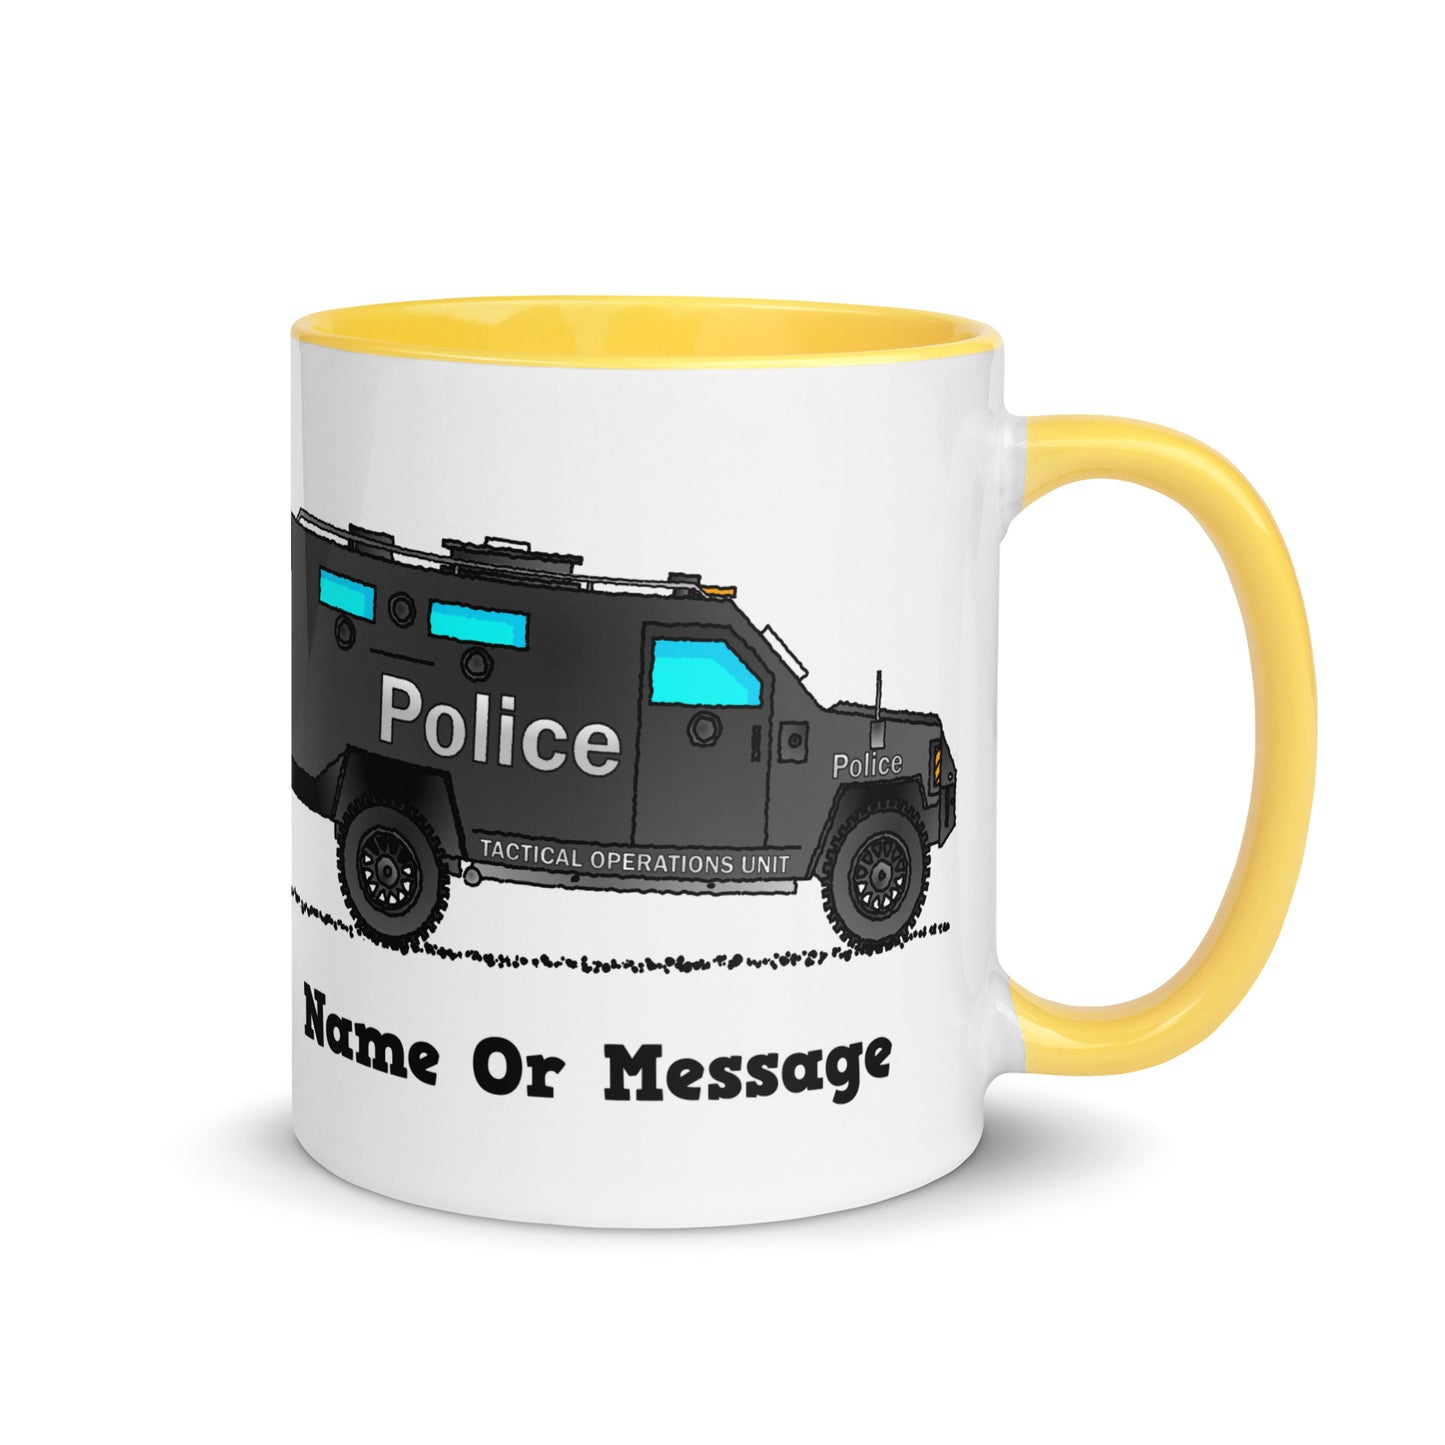 Personalized Police Tactical Operations Unit Mug, Inside And Handle In 6 Colors